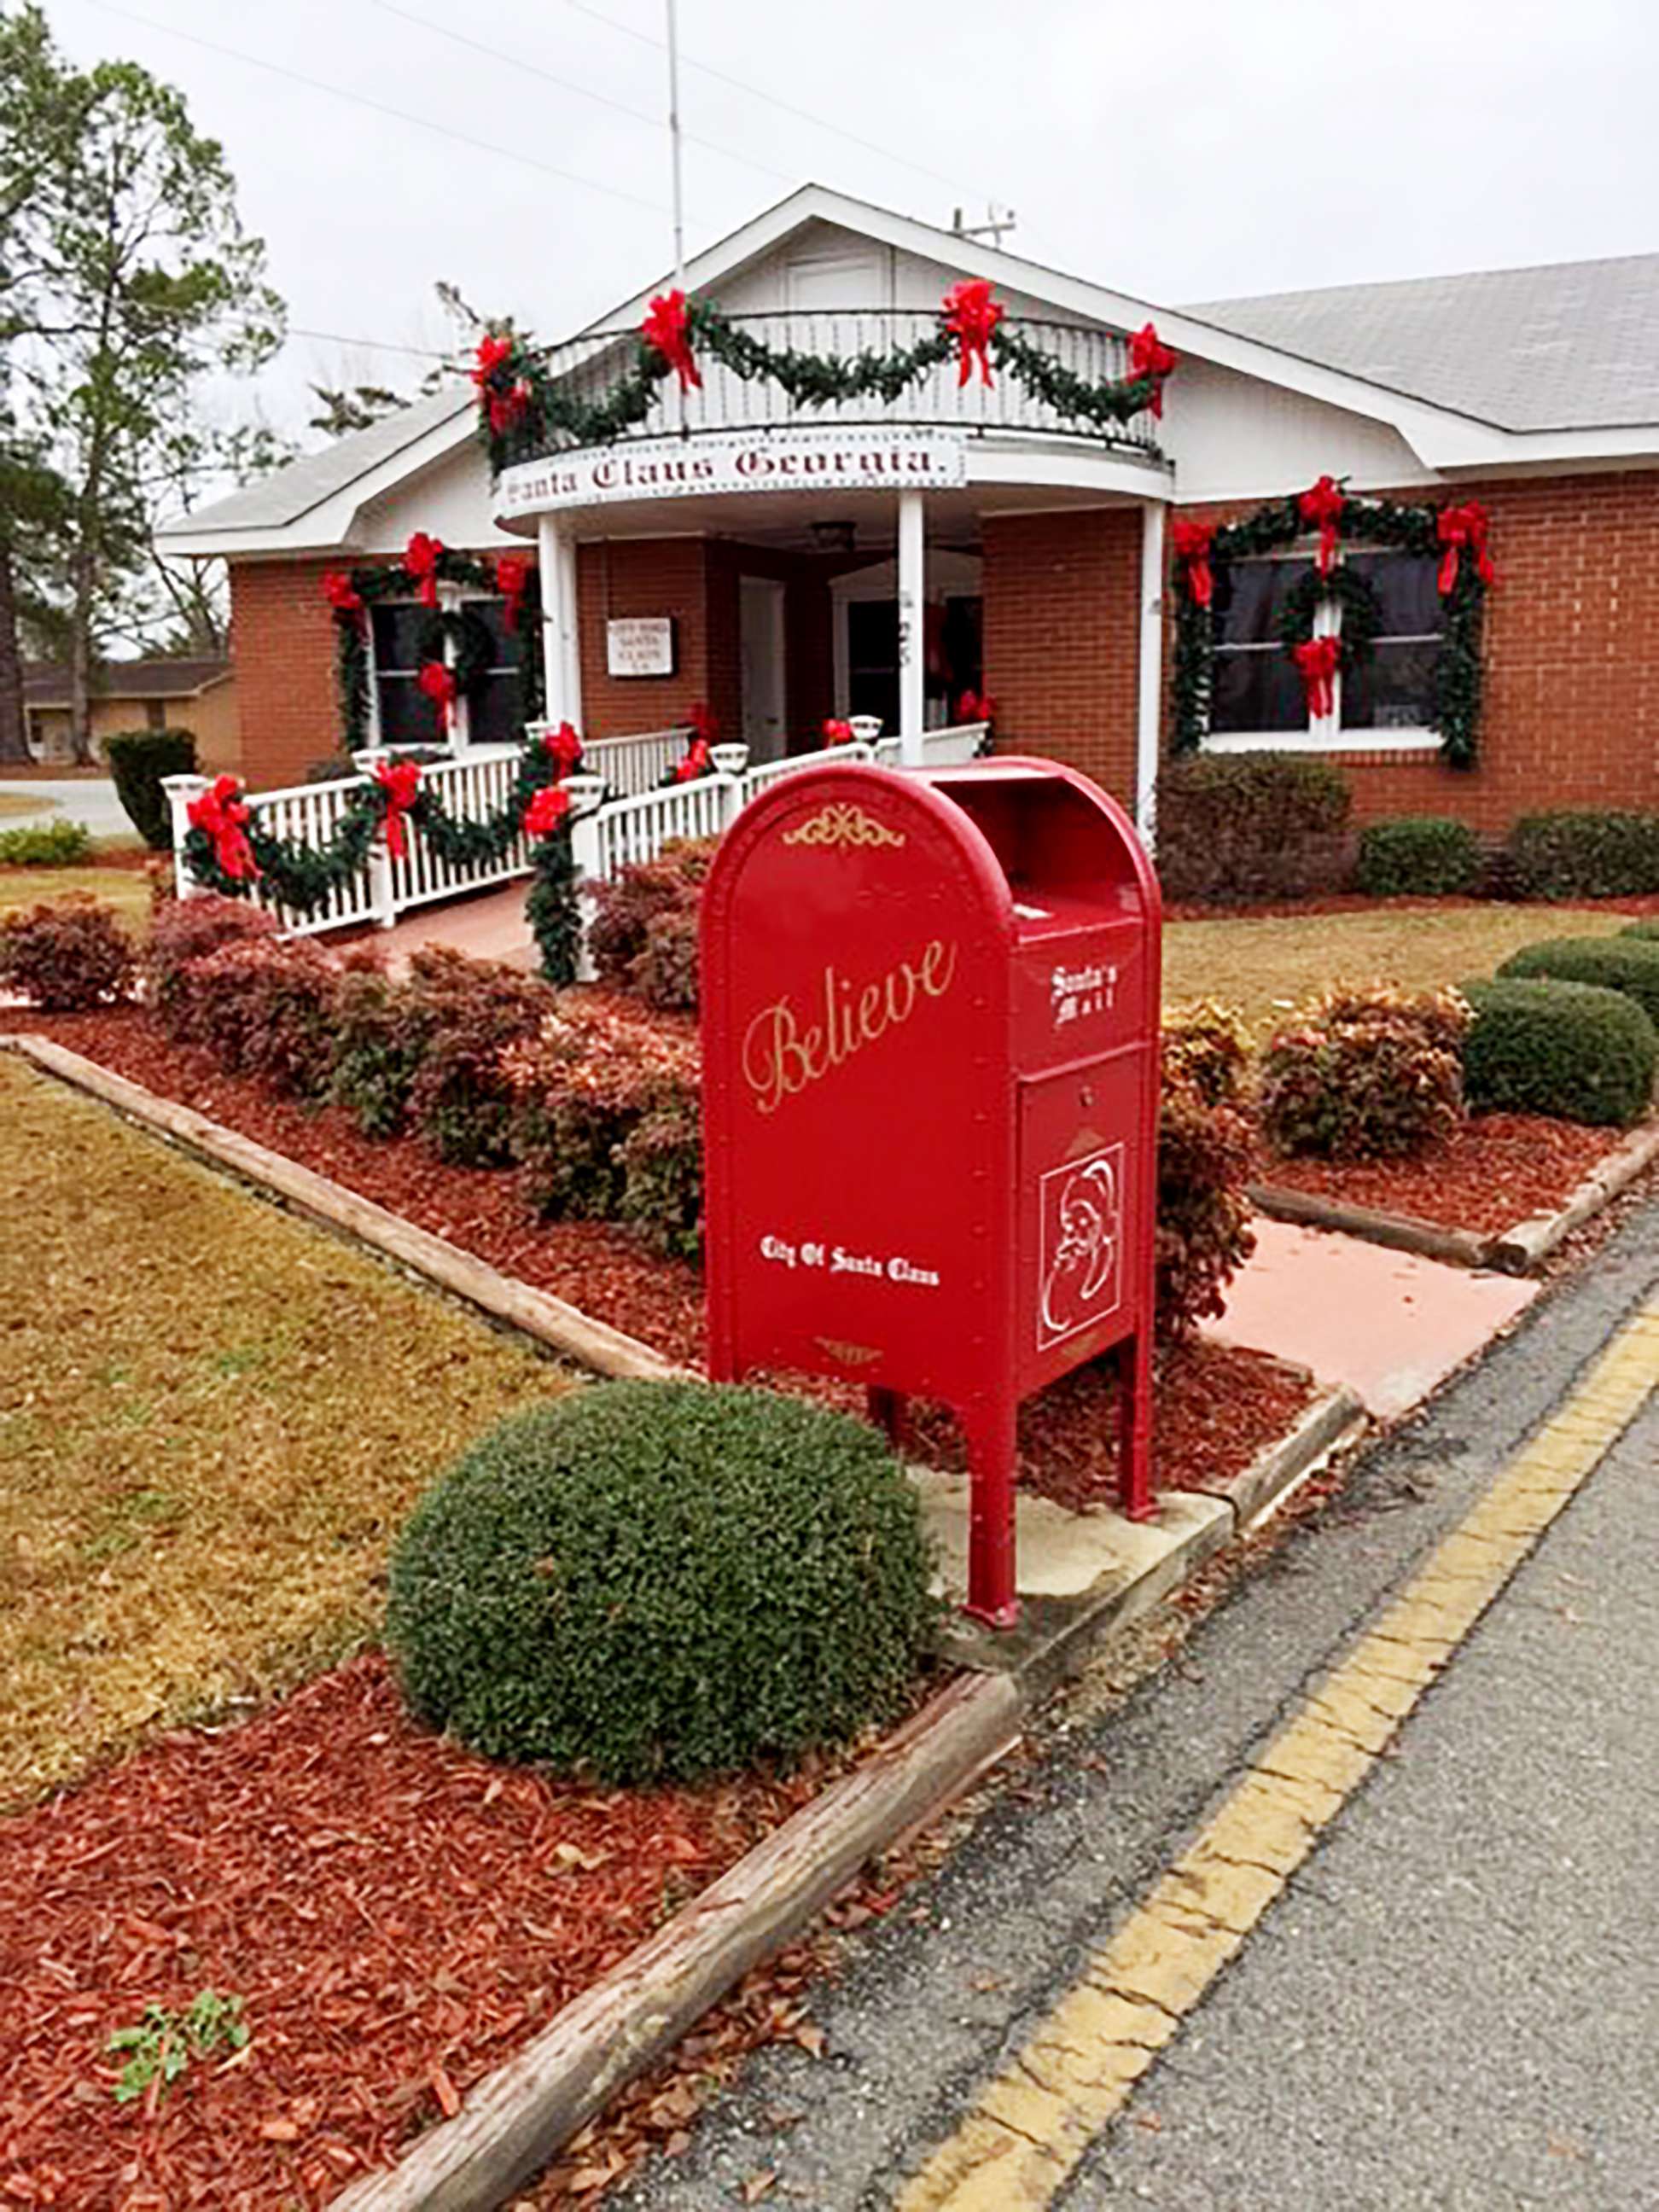 PHOTO: A mailbox in Santa Claus, Georgia, welcomes letters from around the world.